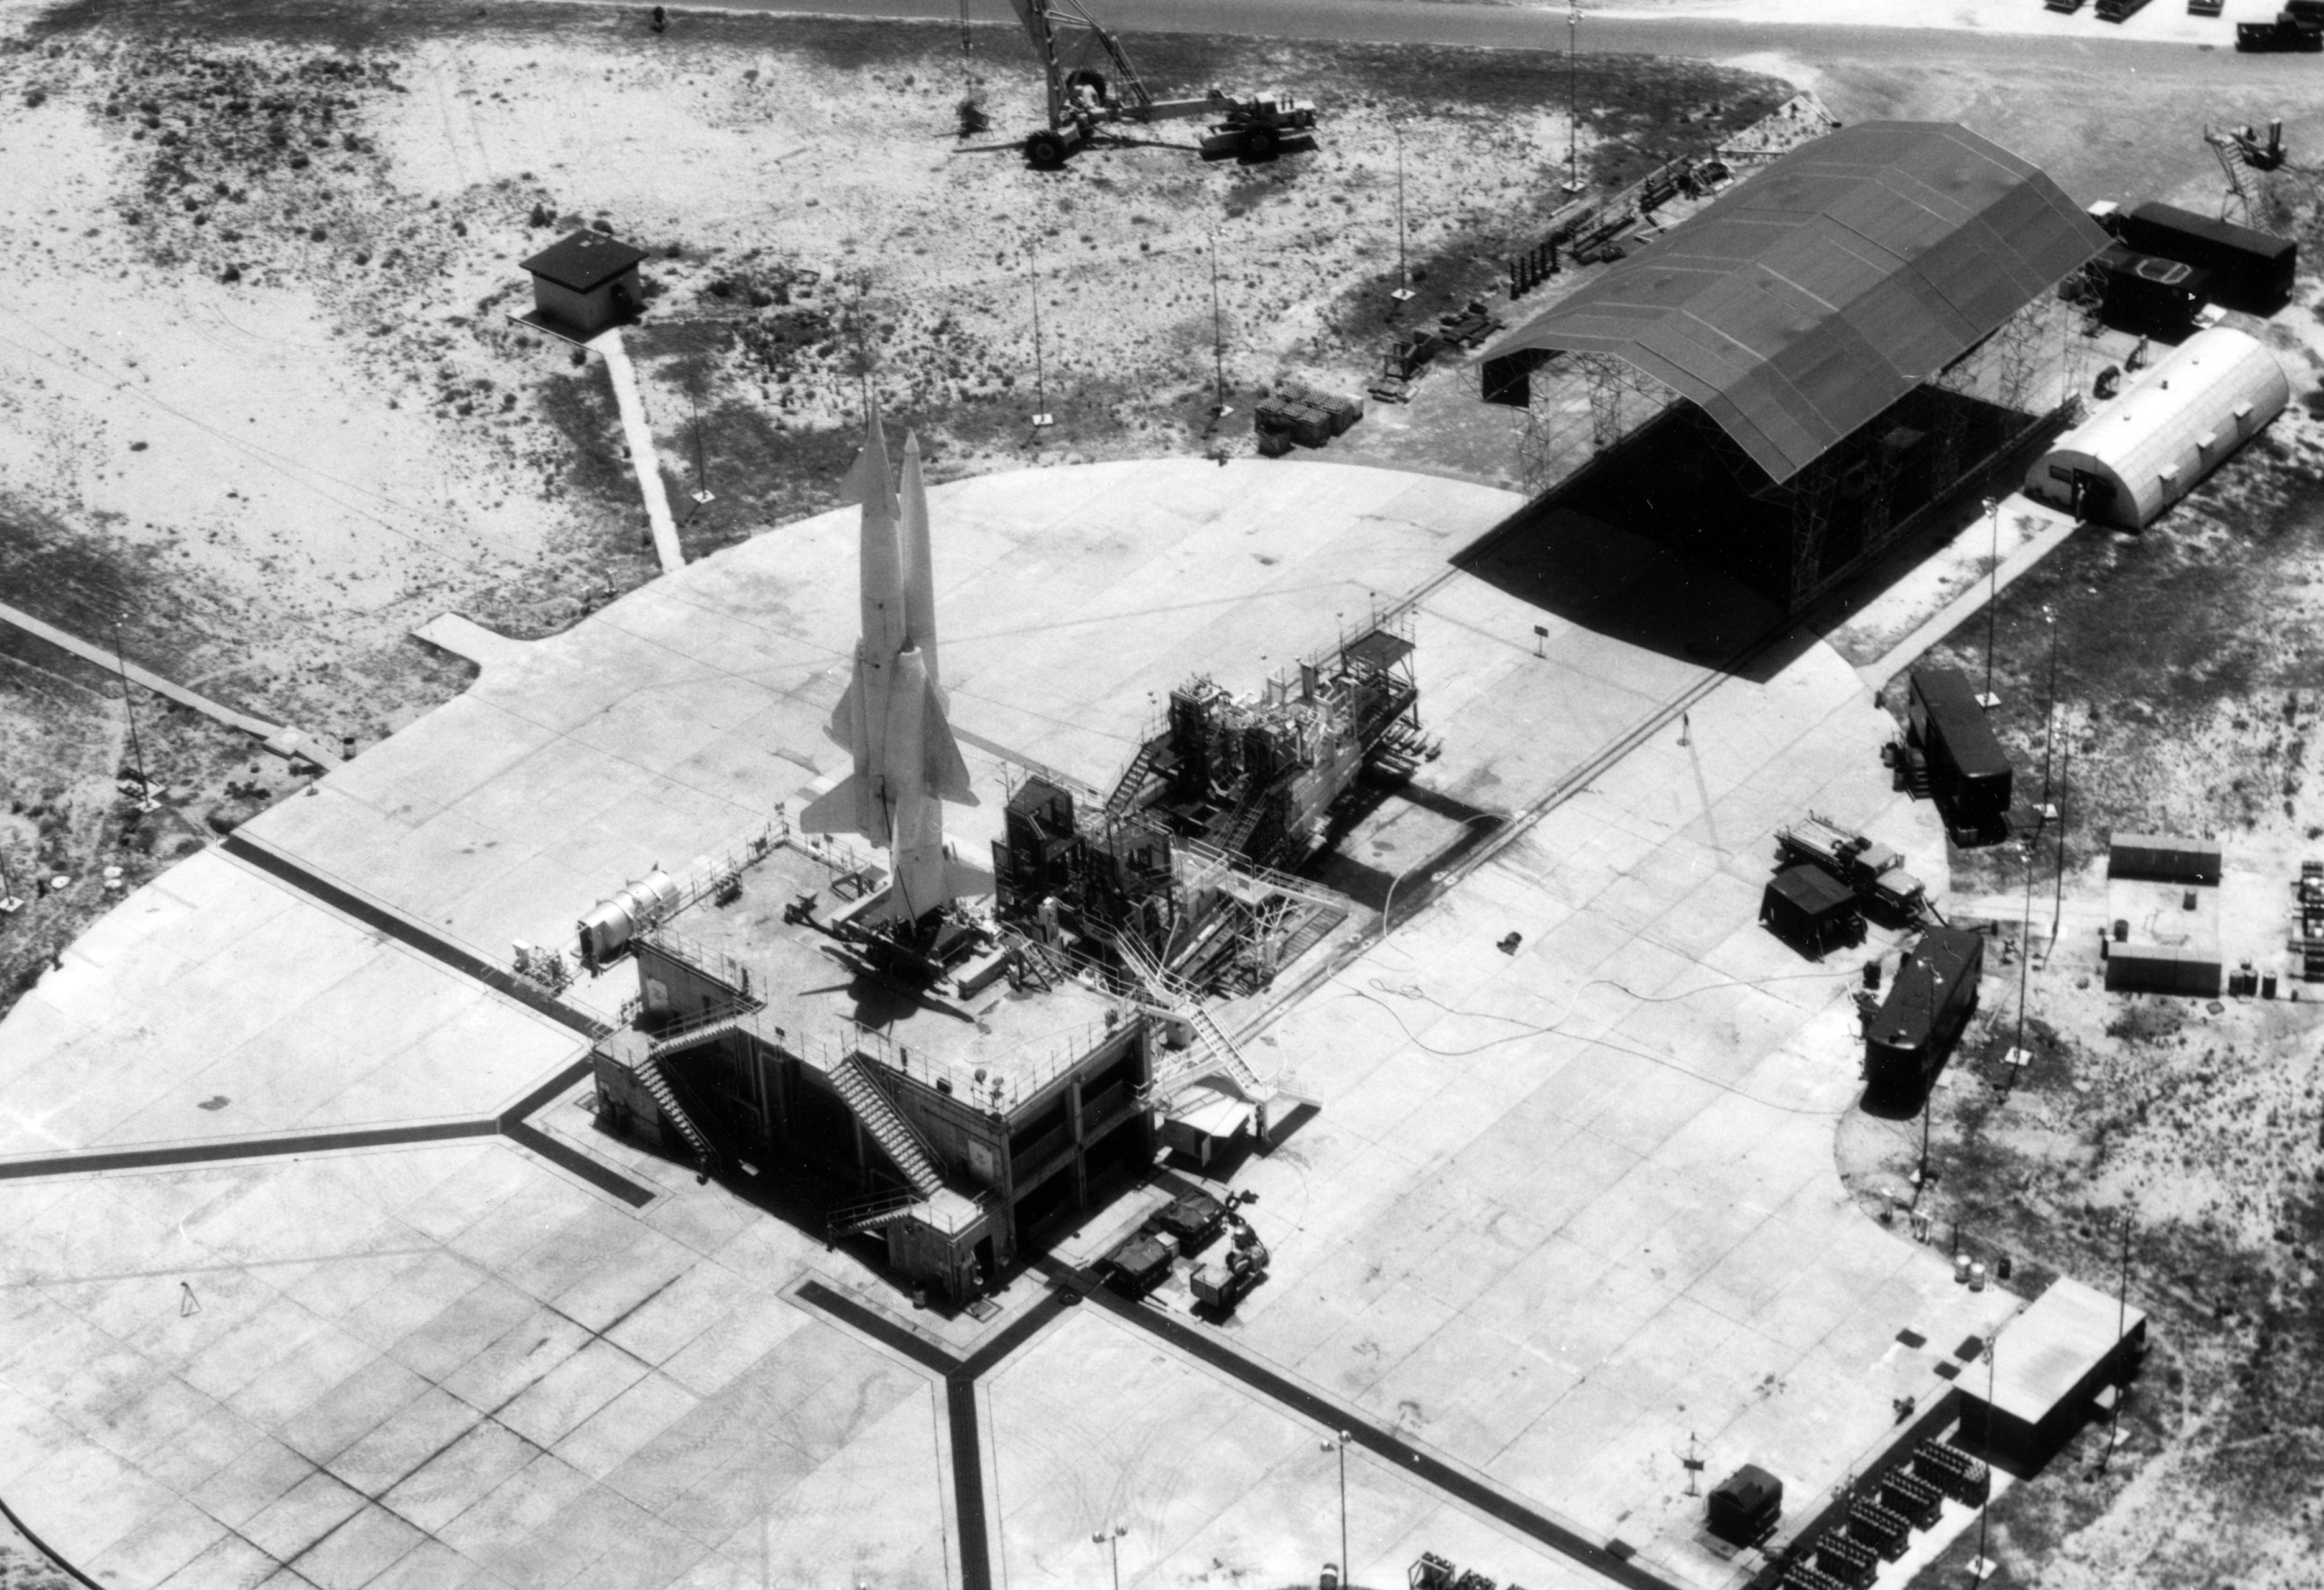 Aerial view of the Navaho launch area at the Air Force Missile Test Center, Cape Canaveral, Florida.